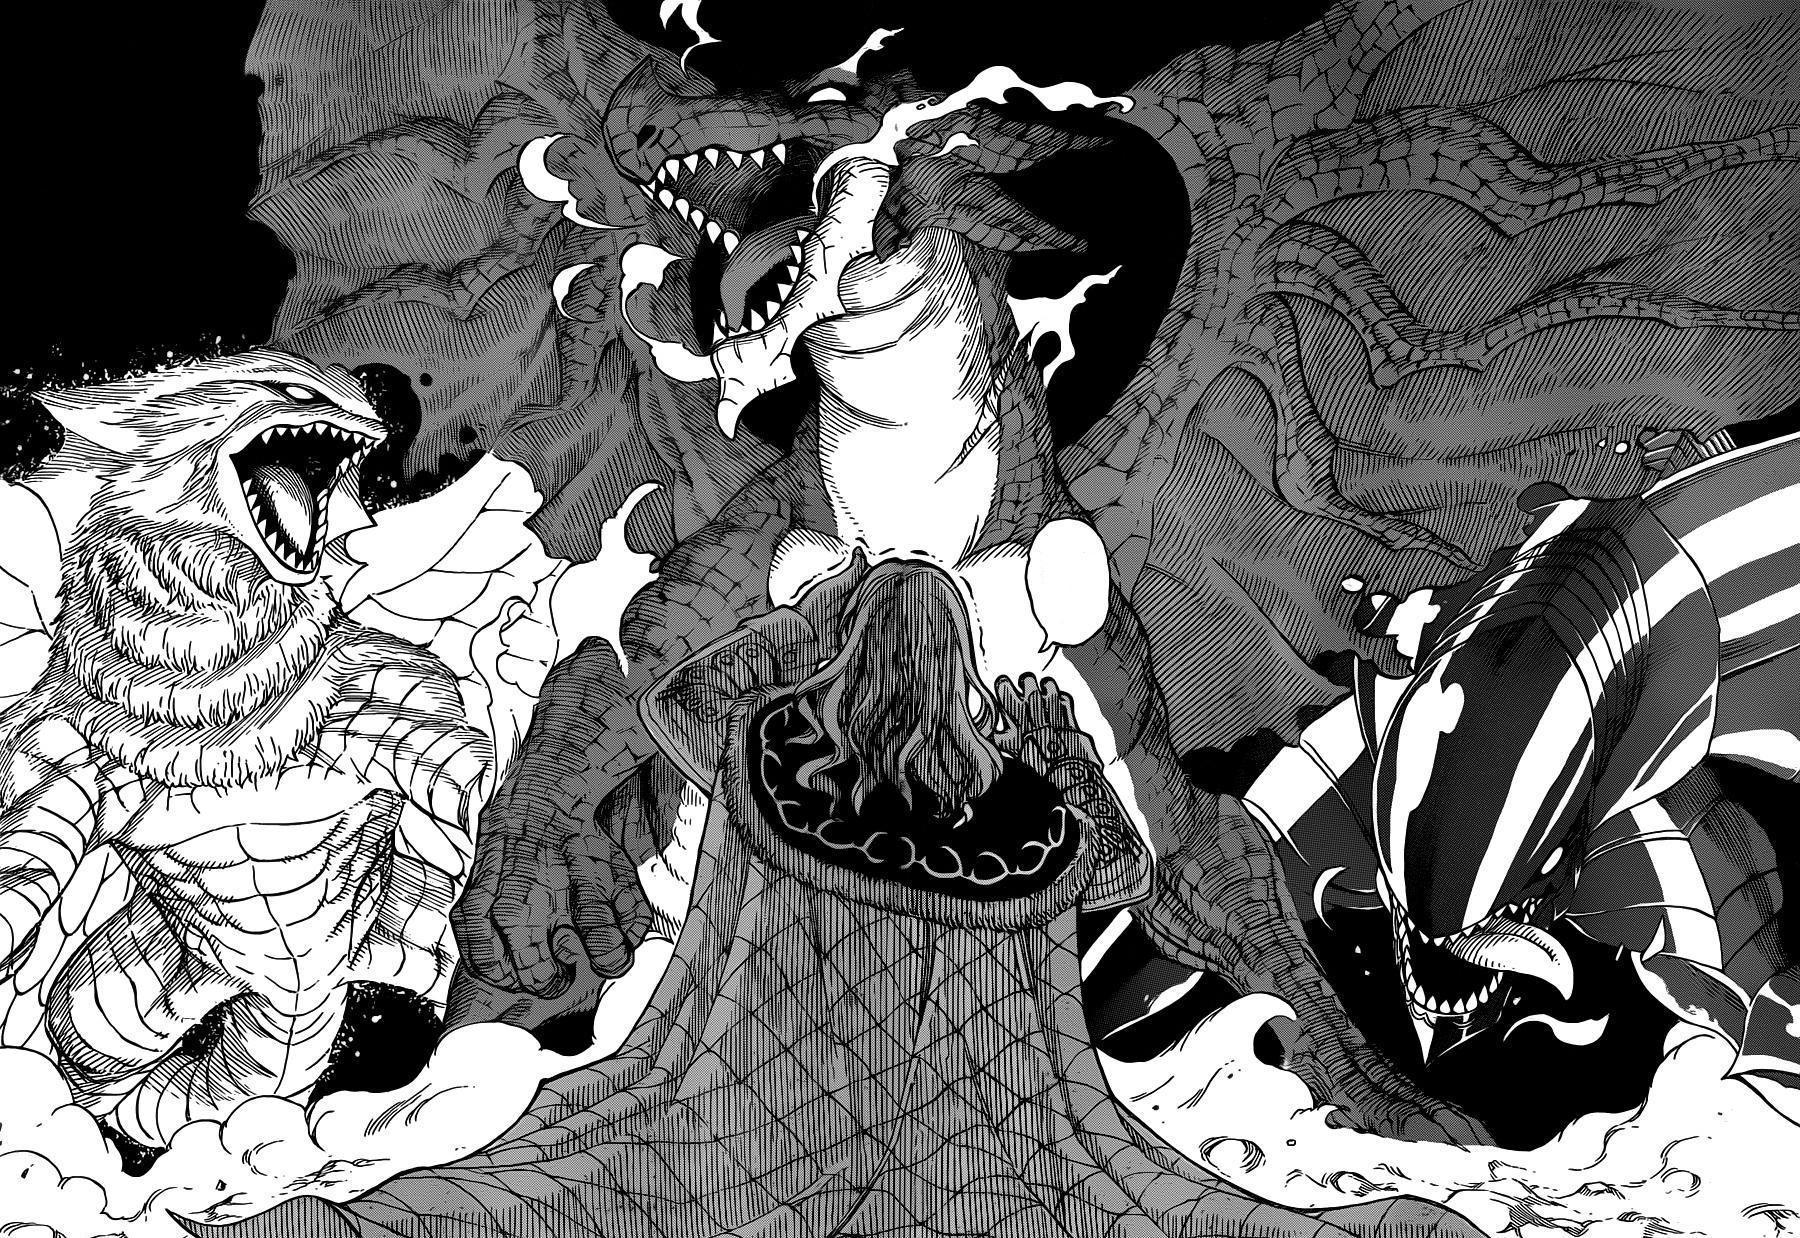 Igneel Image Gallery. Fairy Tail Wiki